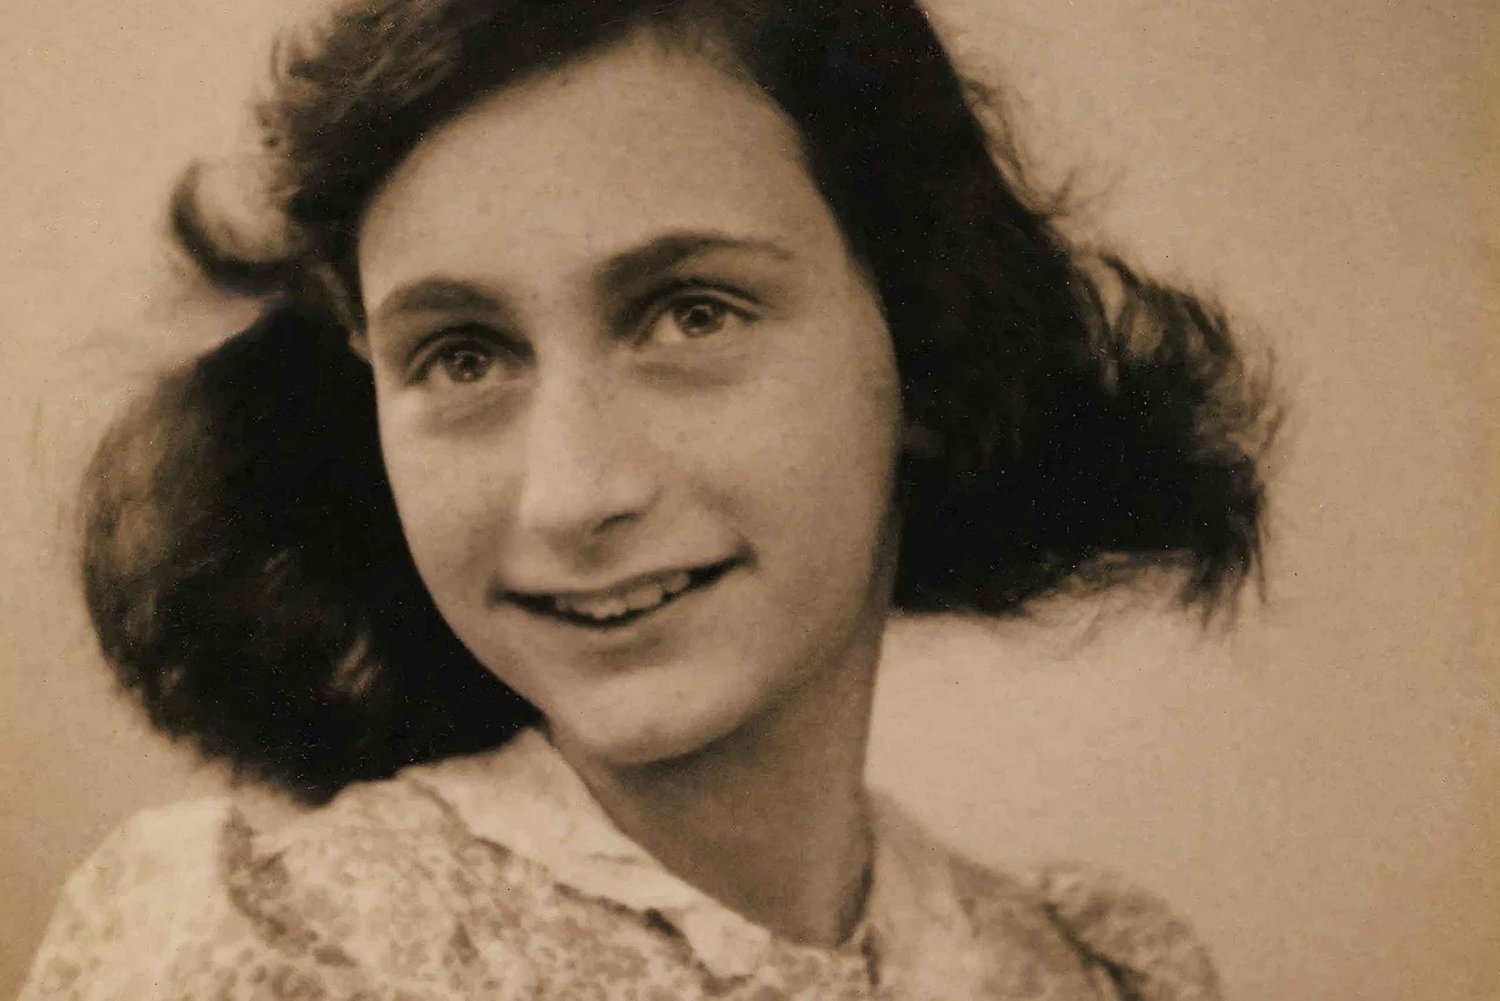 Amsterdam: Anne Frank Guided Walking Tour